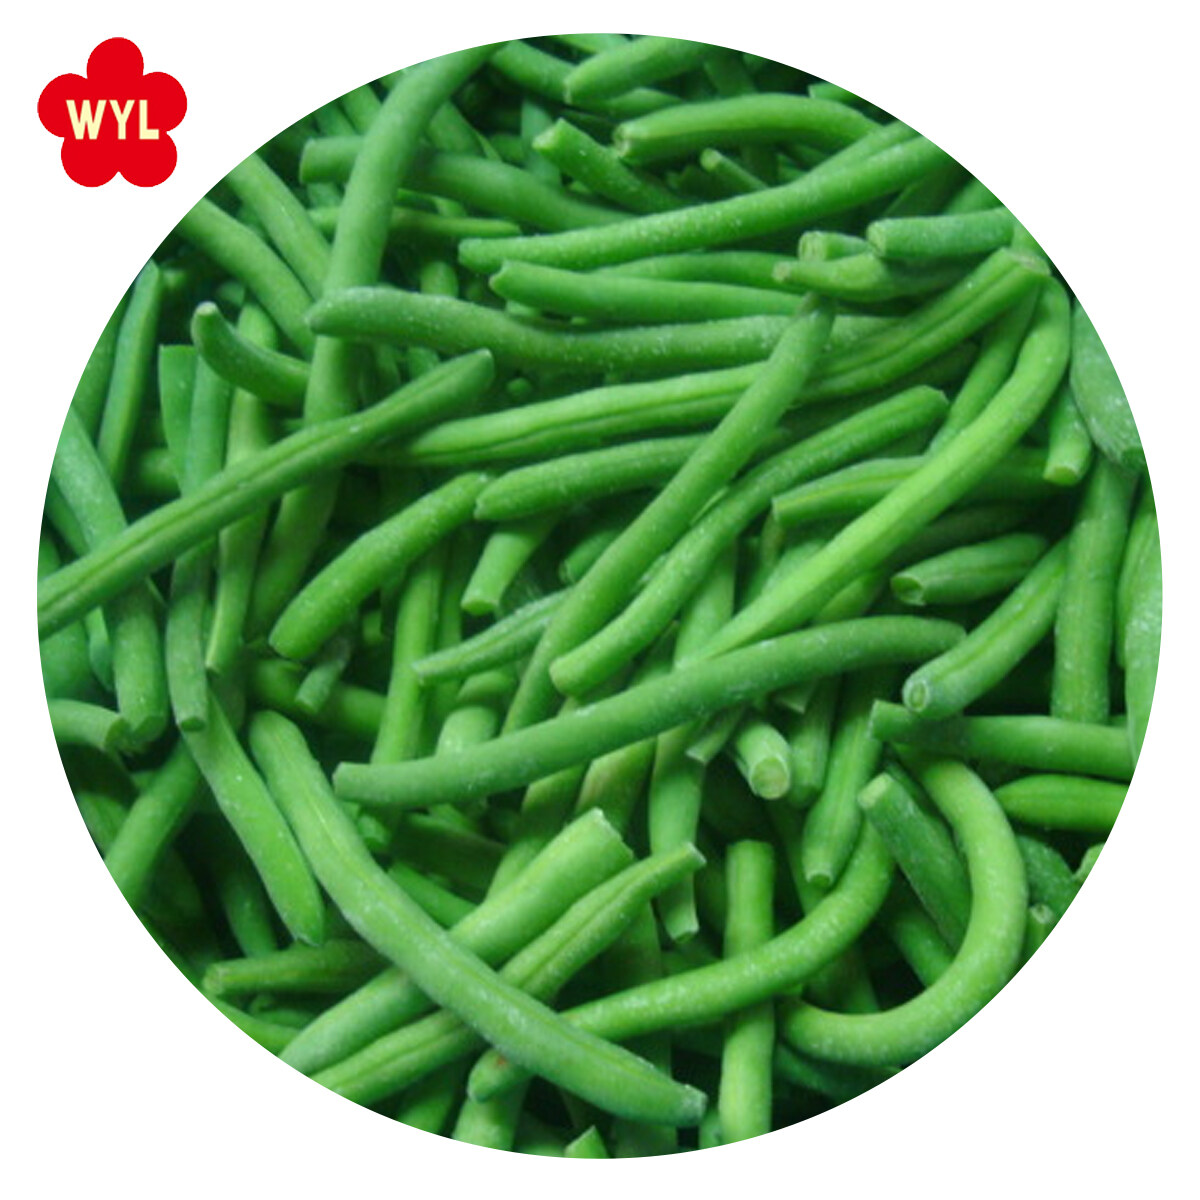 BRC A Approved Taiwan 75 IQF Edamame in Pods with Glazing Frozen Green Soya Bean